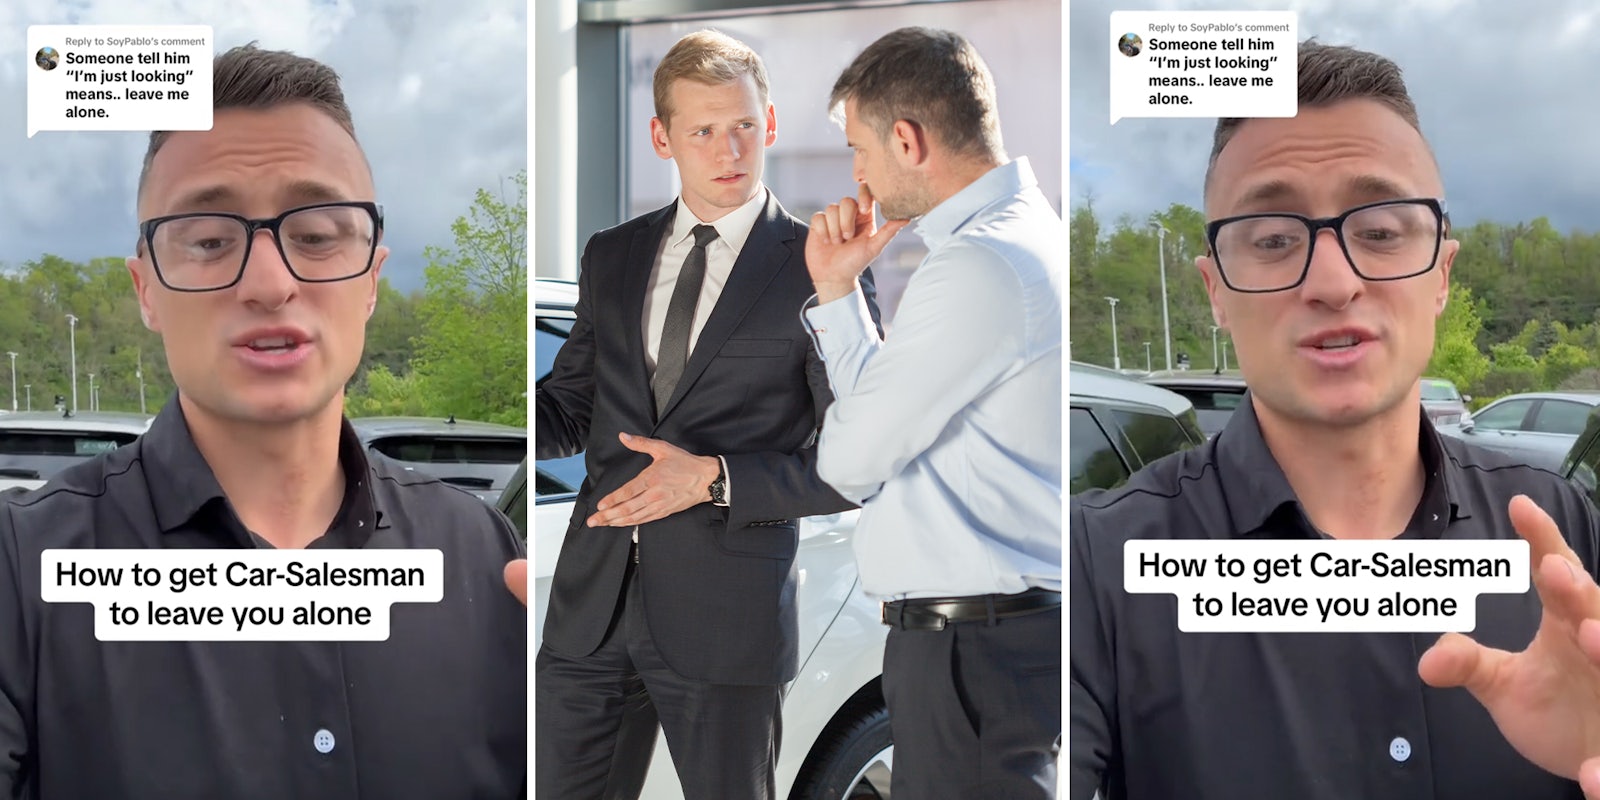 Car salesmen shares how to get car salespeople to leave you alone—and it’s not by saying ‘I’m just looking’